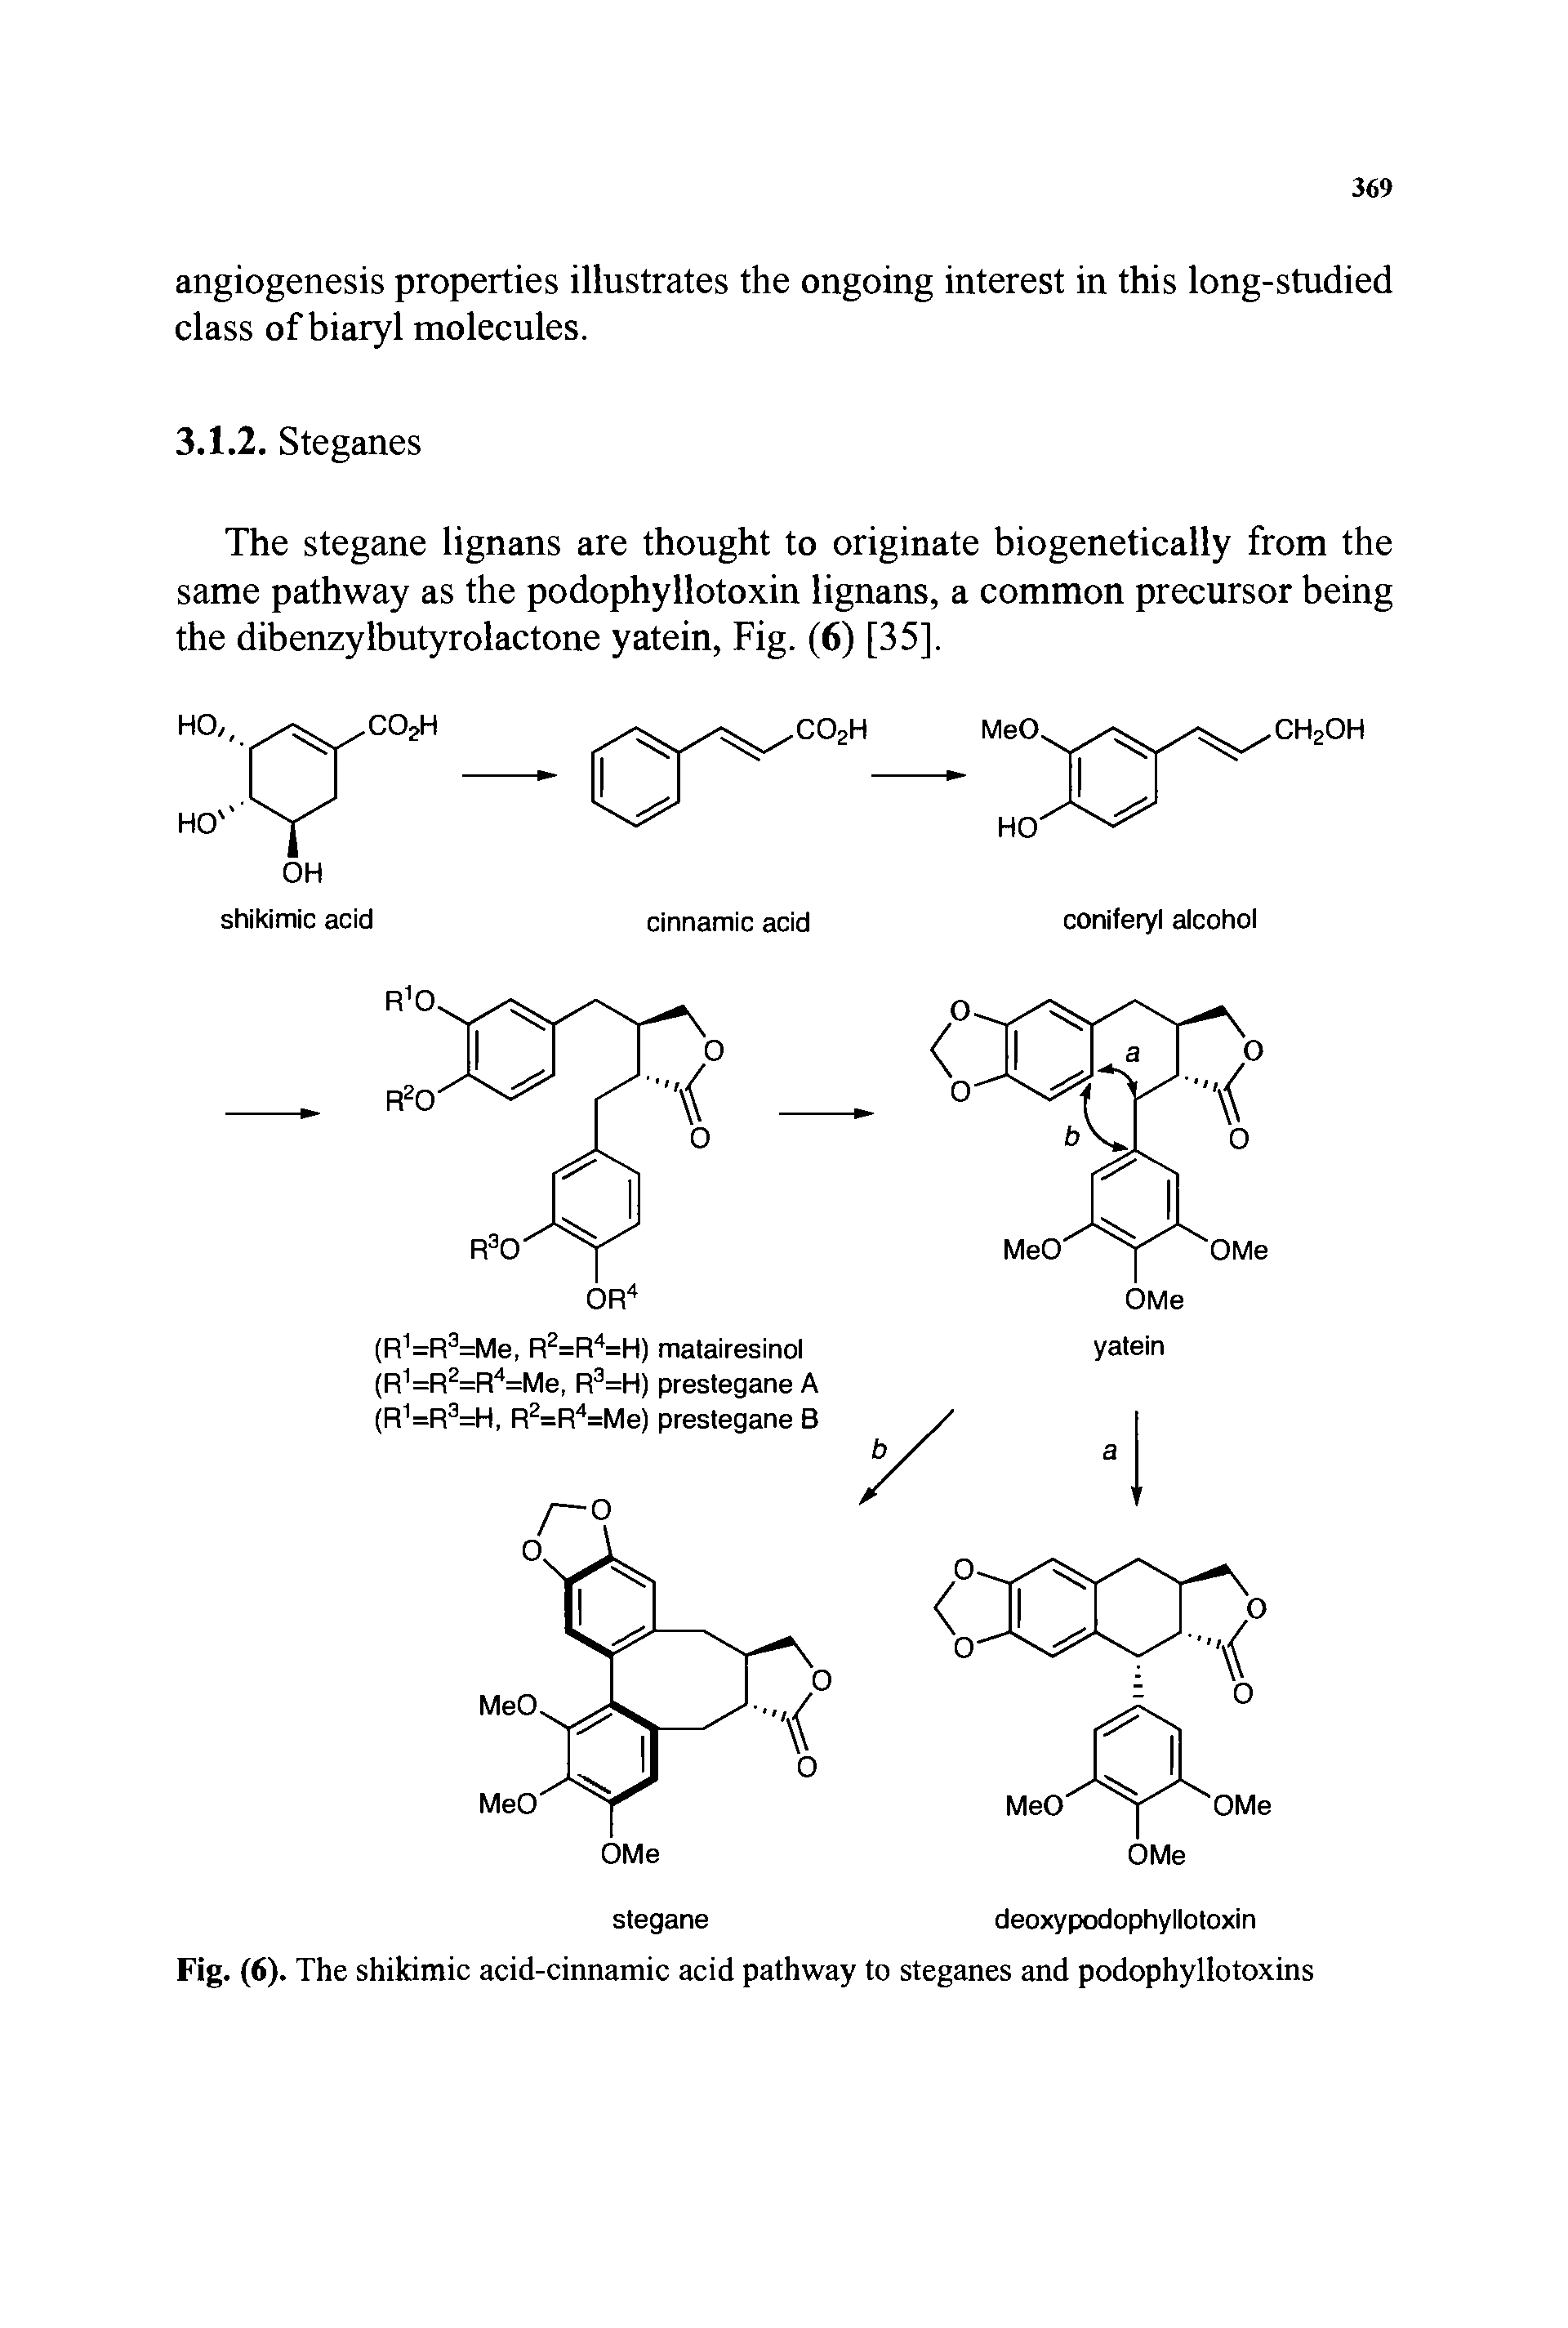 Fig. (6). The shikimic acid-cinnamic acid pathway to steganes and podophyllotoxins...